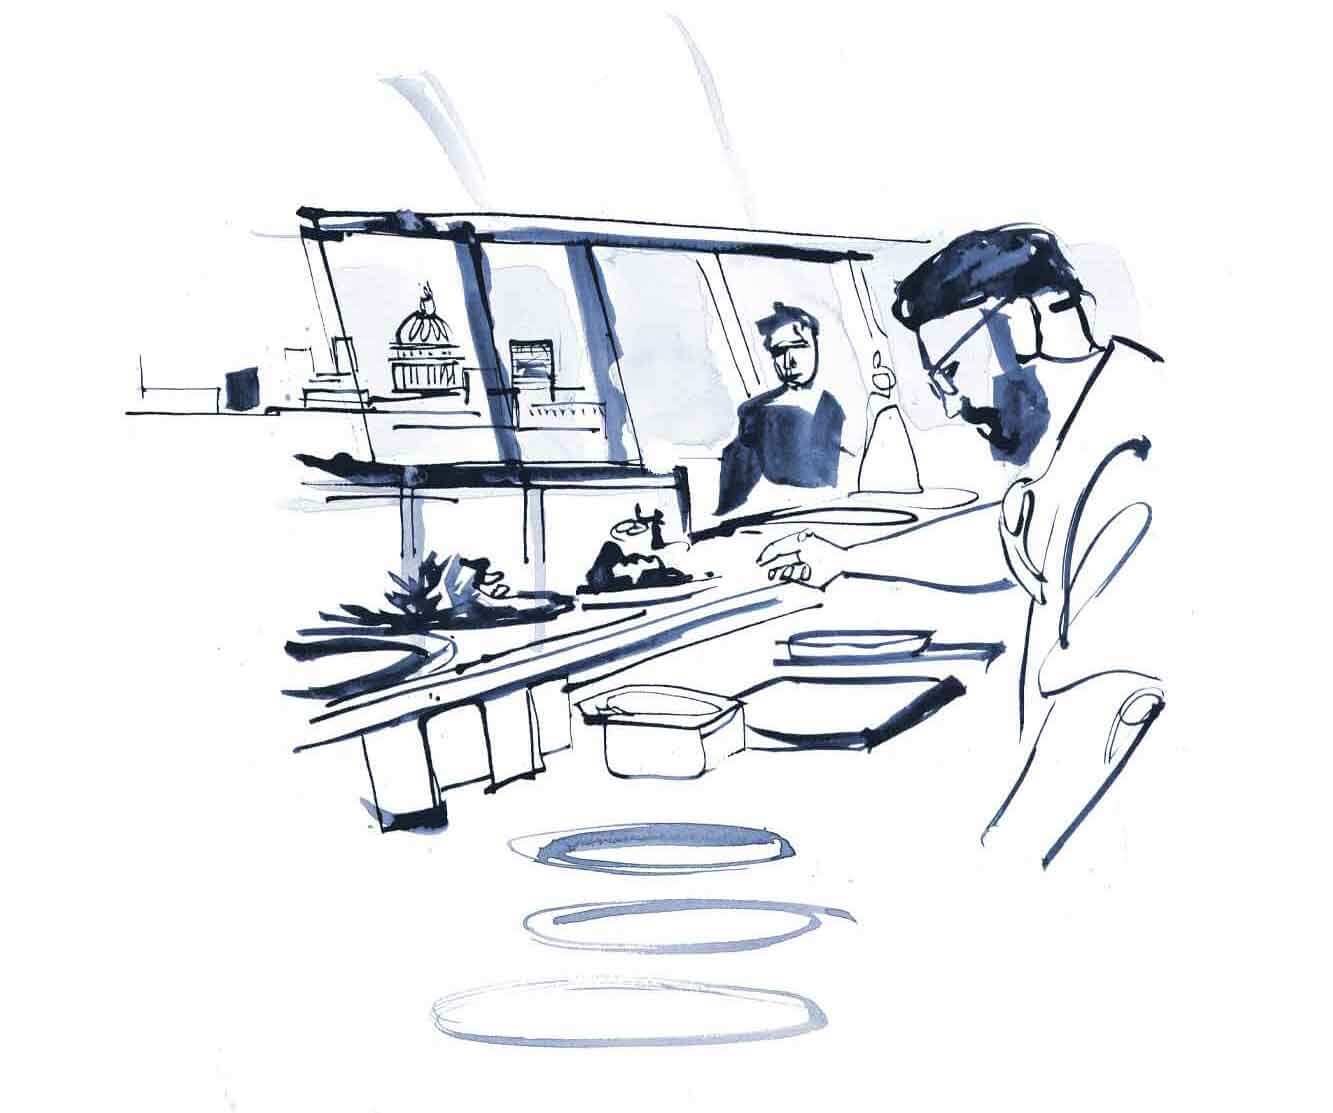 Illustrating the oxo tower restaurant during service. Chefs plating up and waiters serving food and cocktails. Brushstroke style illustrating hospitality.